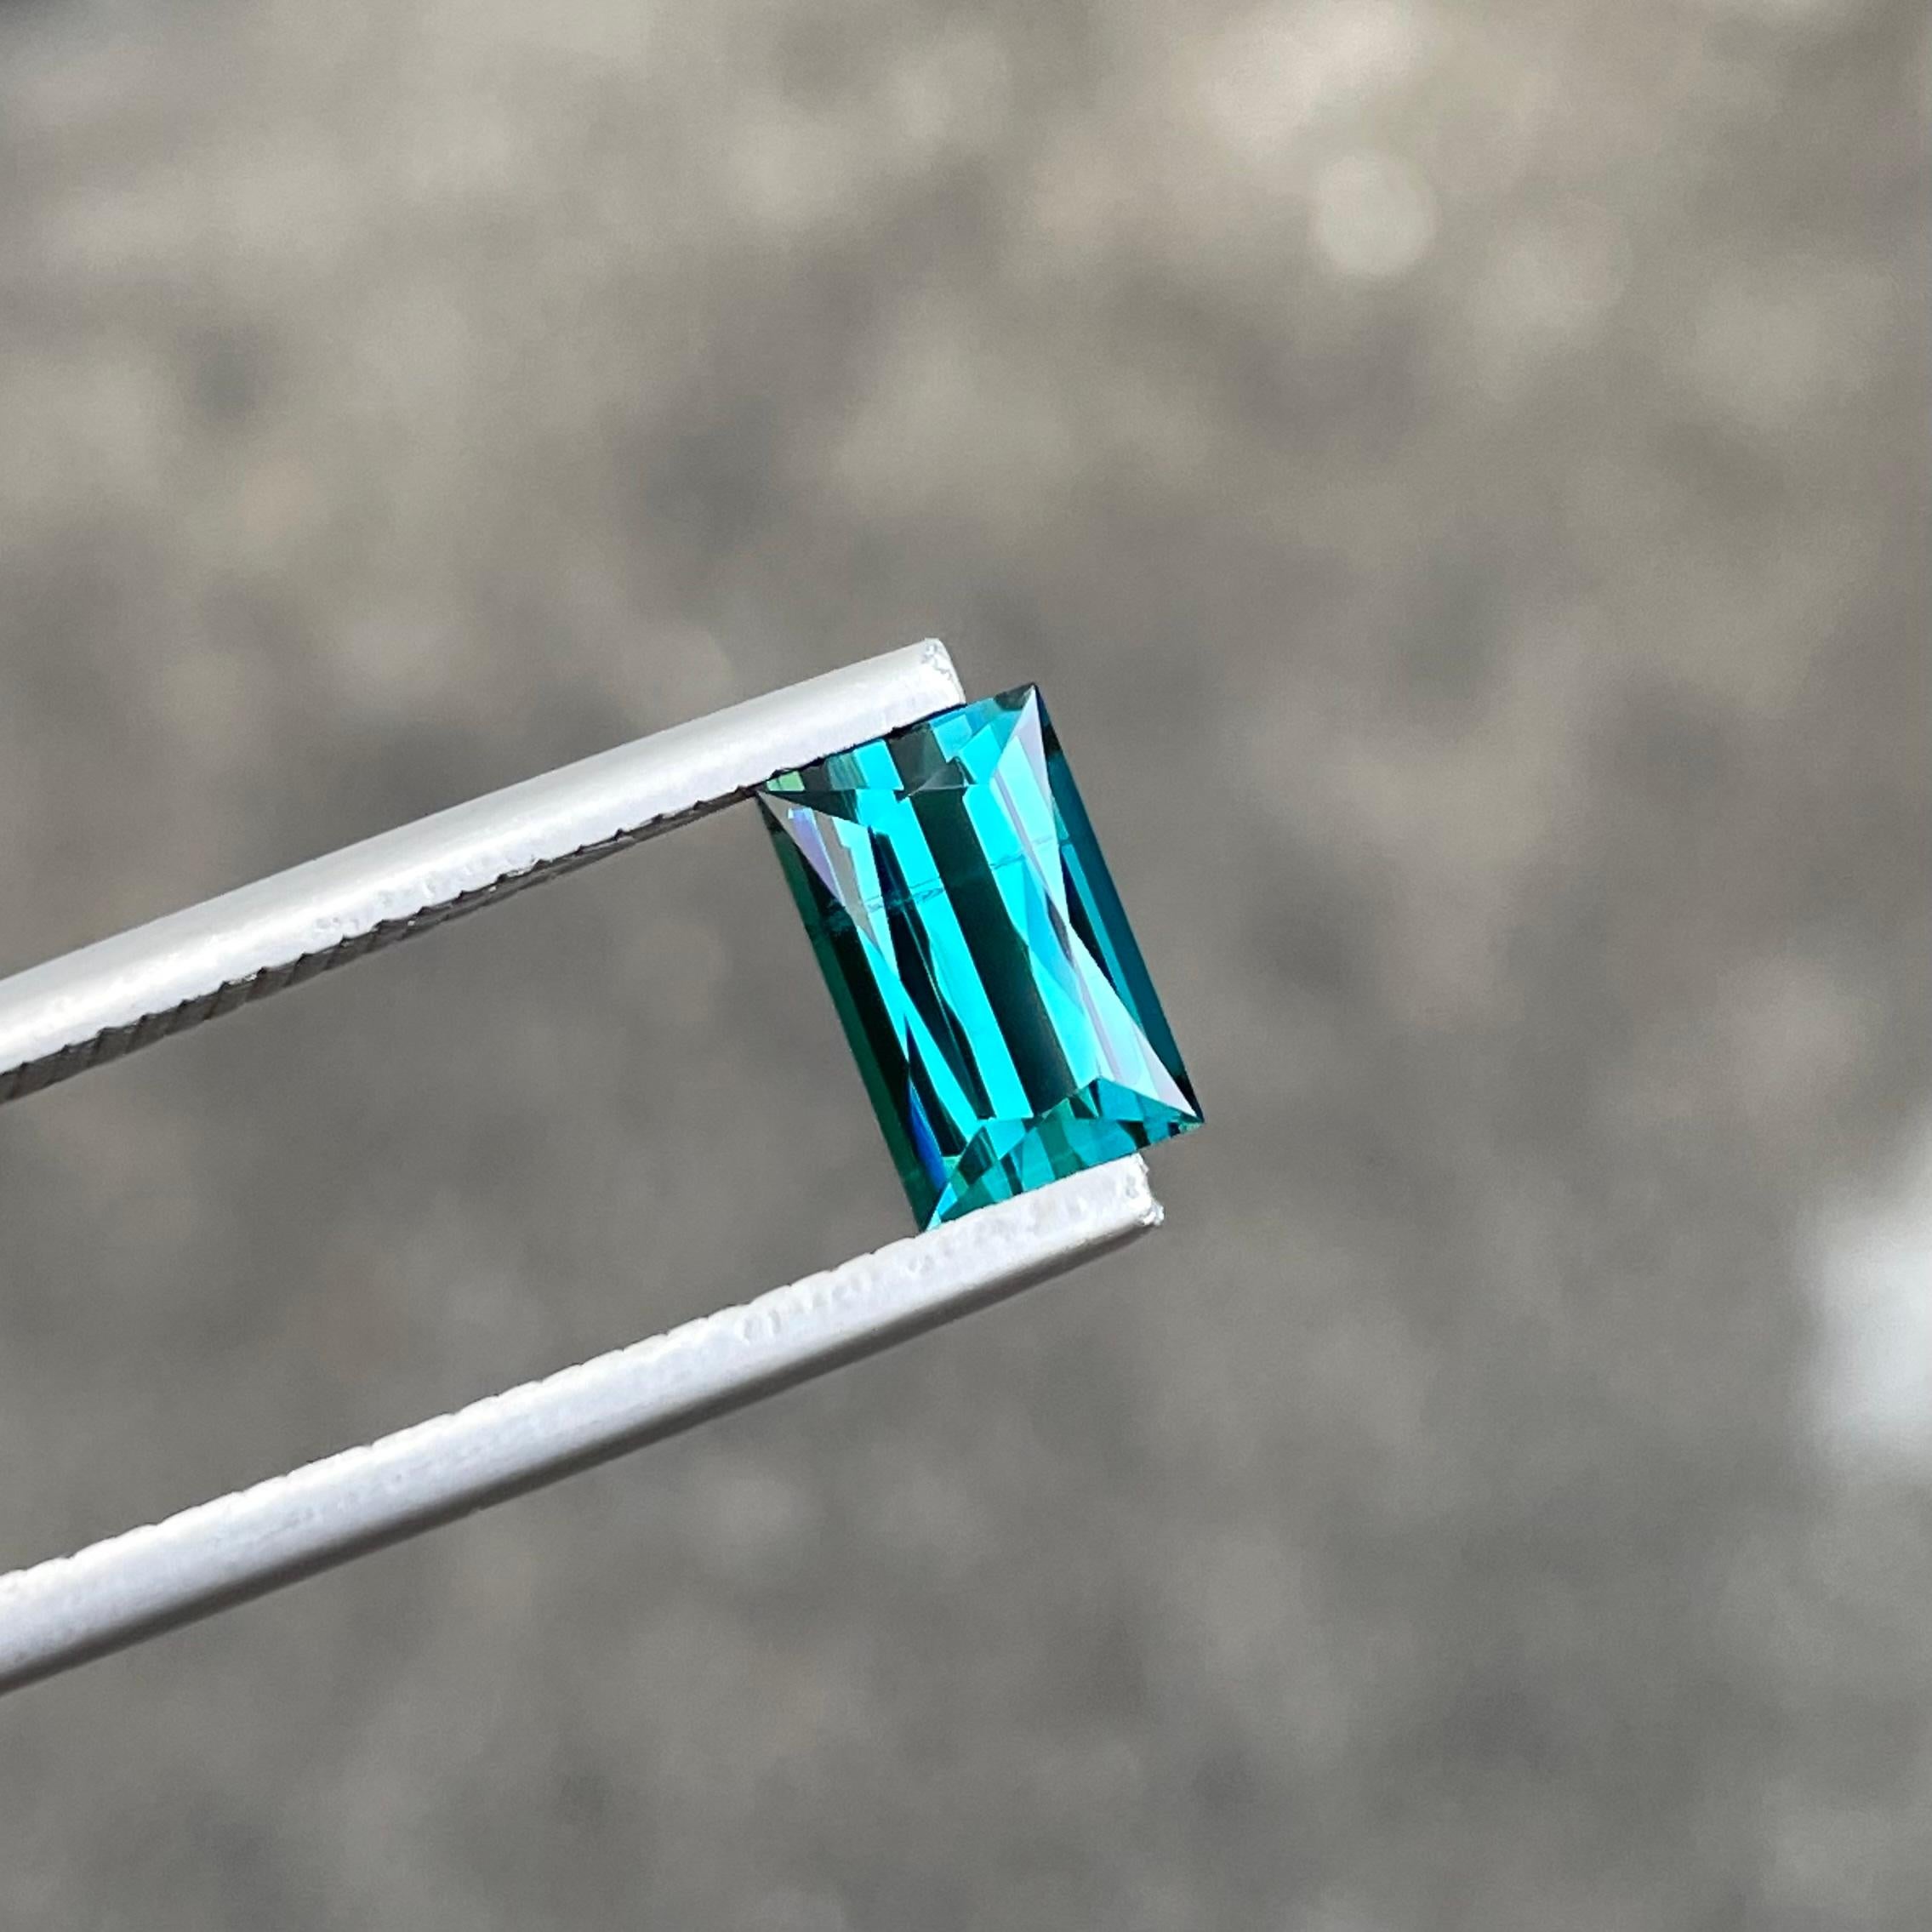 Gemstone Type	Tourmaline Gemstone
Weight	1.65 carats
Dimensions	8.3 x 5.3 x 4.1 mm
Clarity	SI (Slightly Included)
Shape	Rectangular
Cut	Scissors
Origin	Afghanistan
Treatment	None



The Neon Blue Tourmaline is a true marvel of nature, boasting a